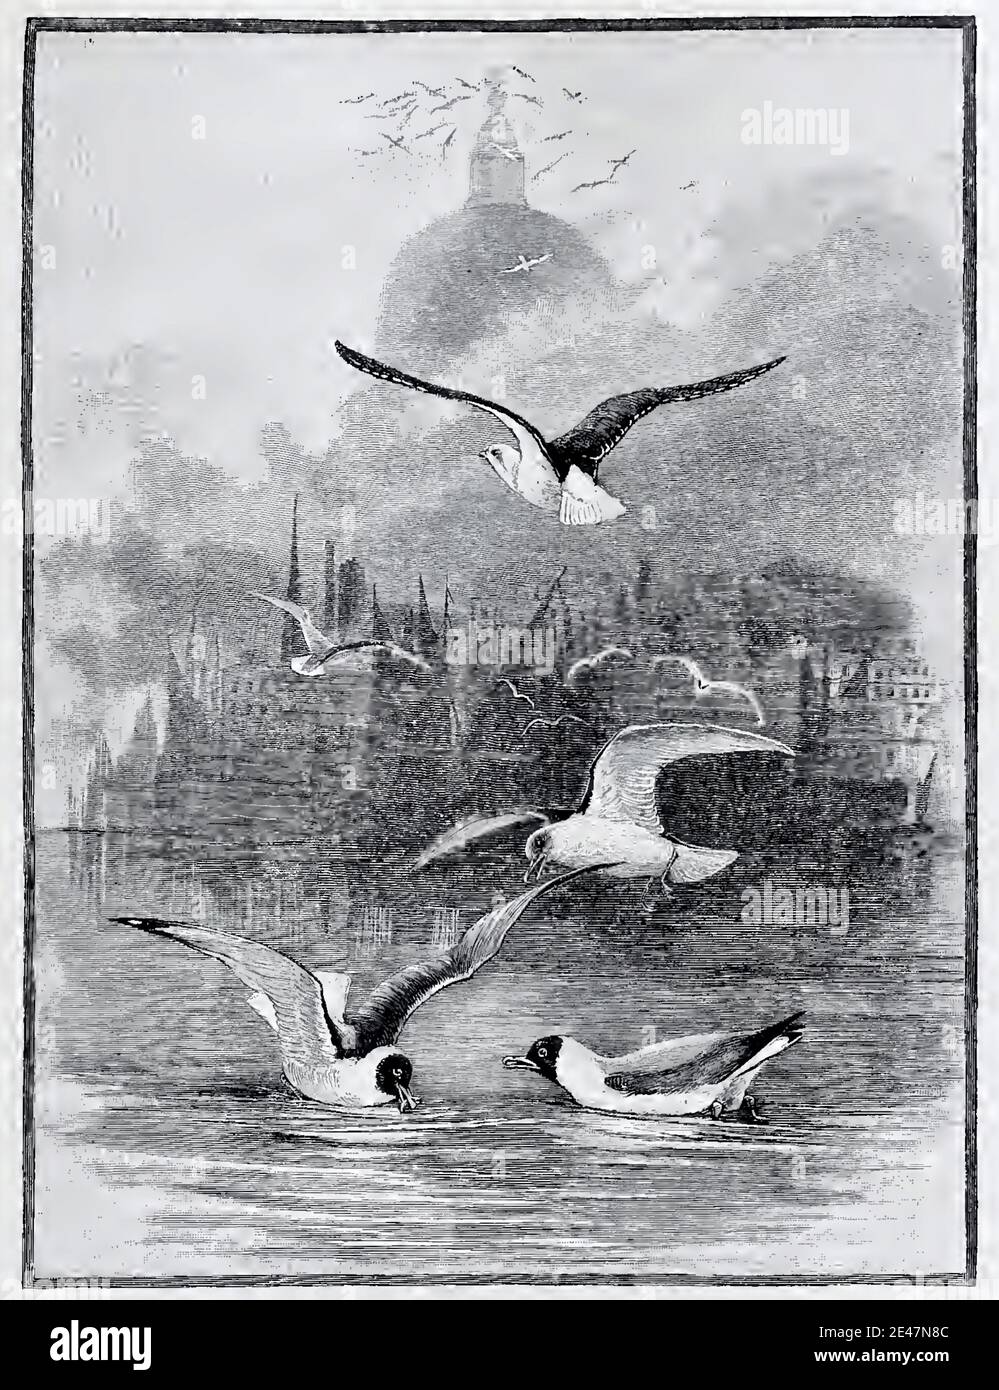 Vintage illustration by the wildlife artist Charles Whymple entitled Gulls on the Thames. Picture shows seagulls on the Thames with St Paul's nearby. Stock Photo